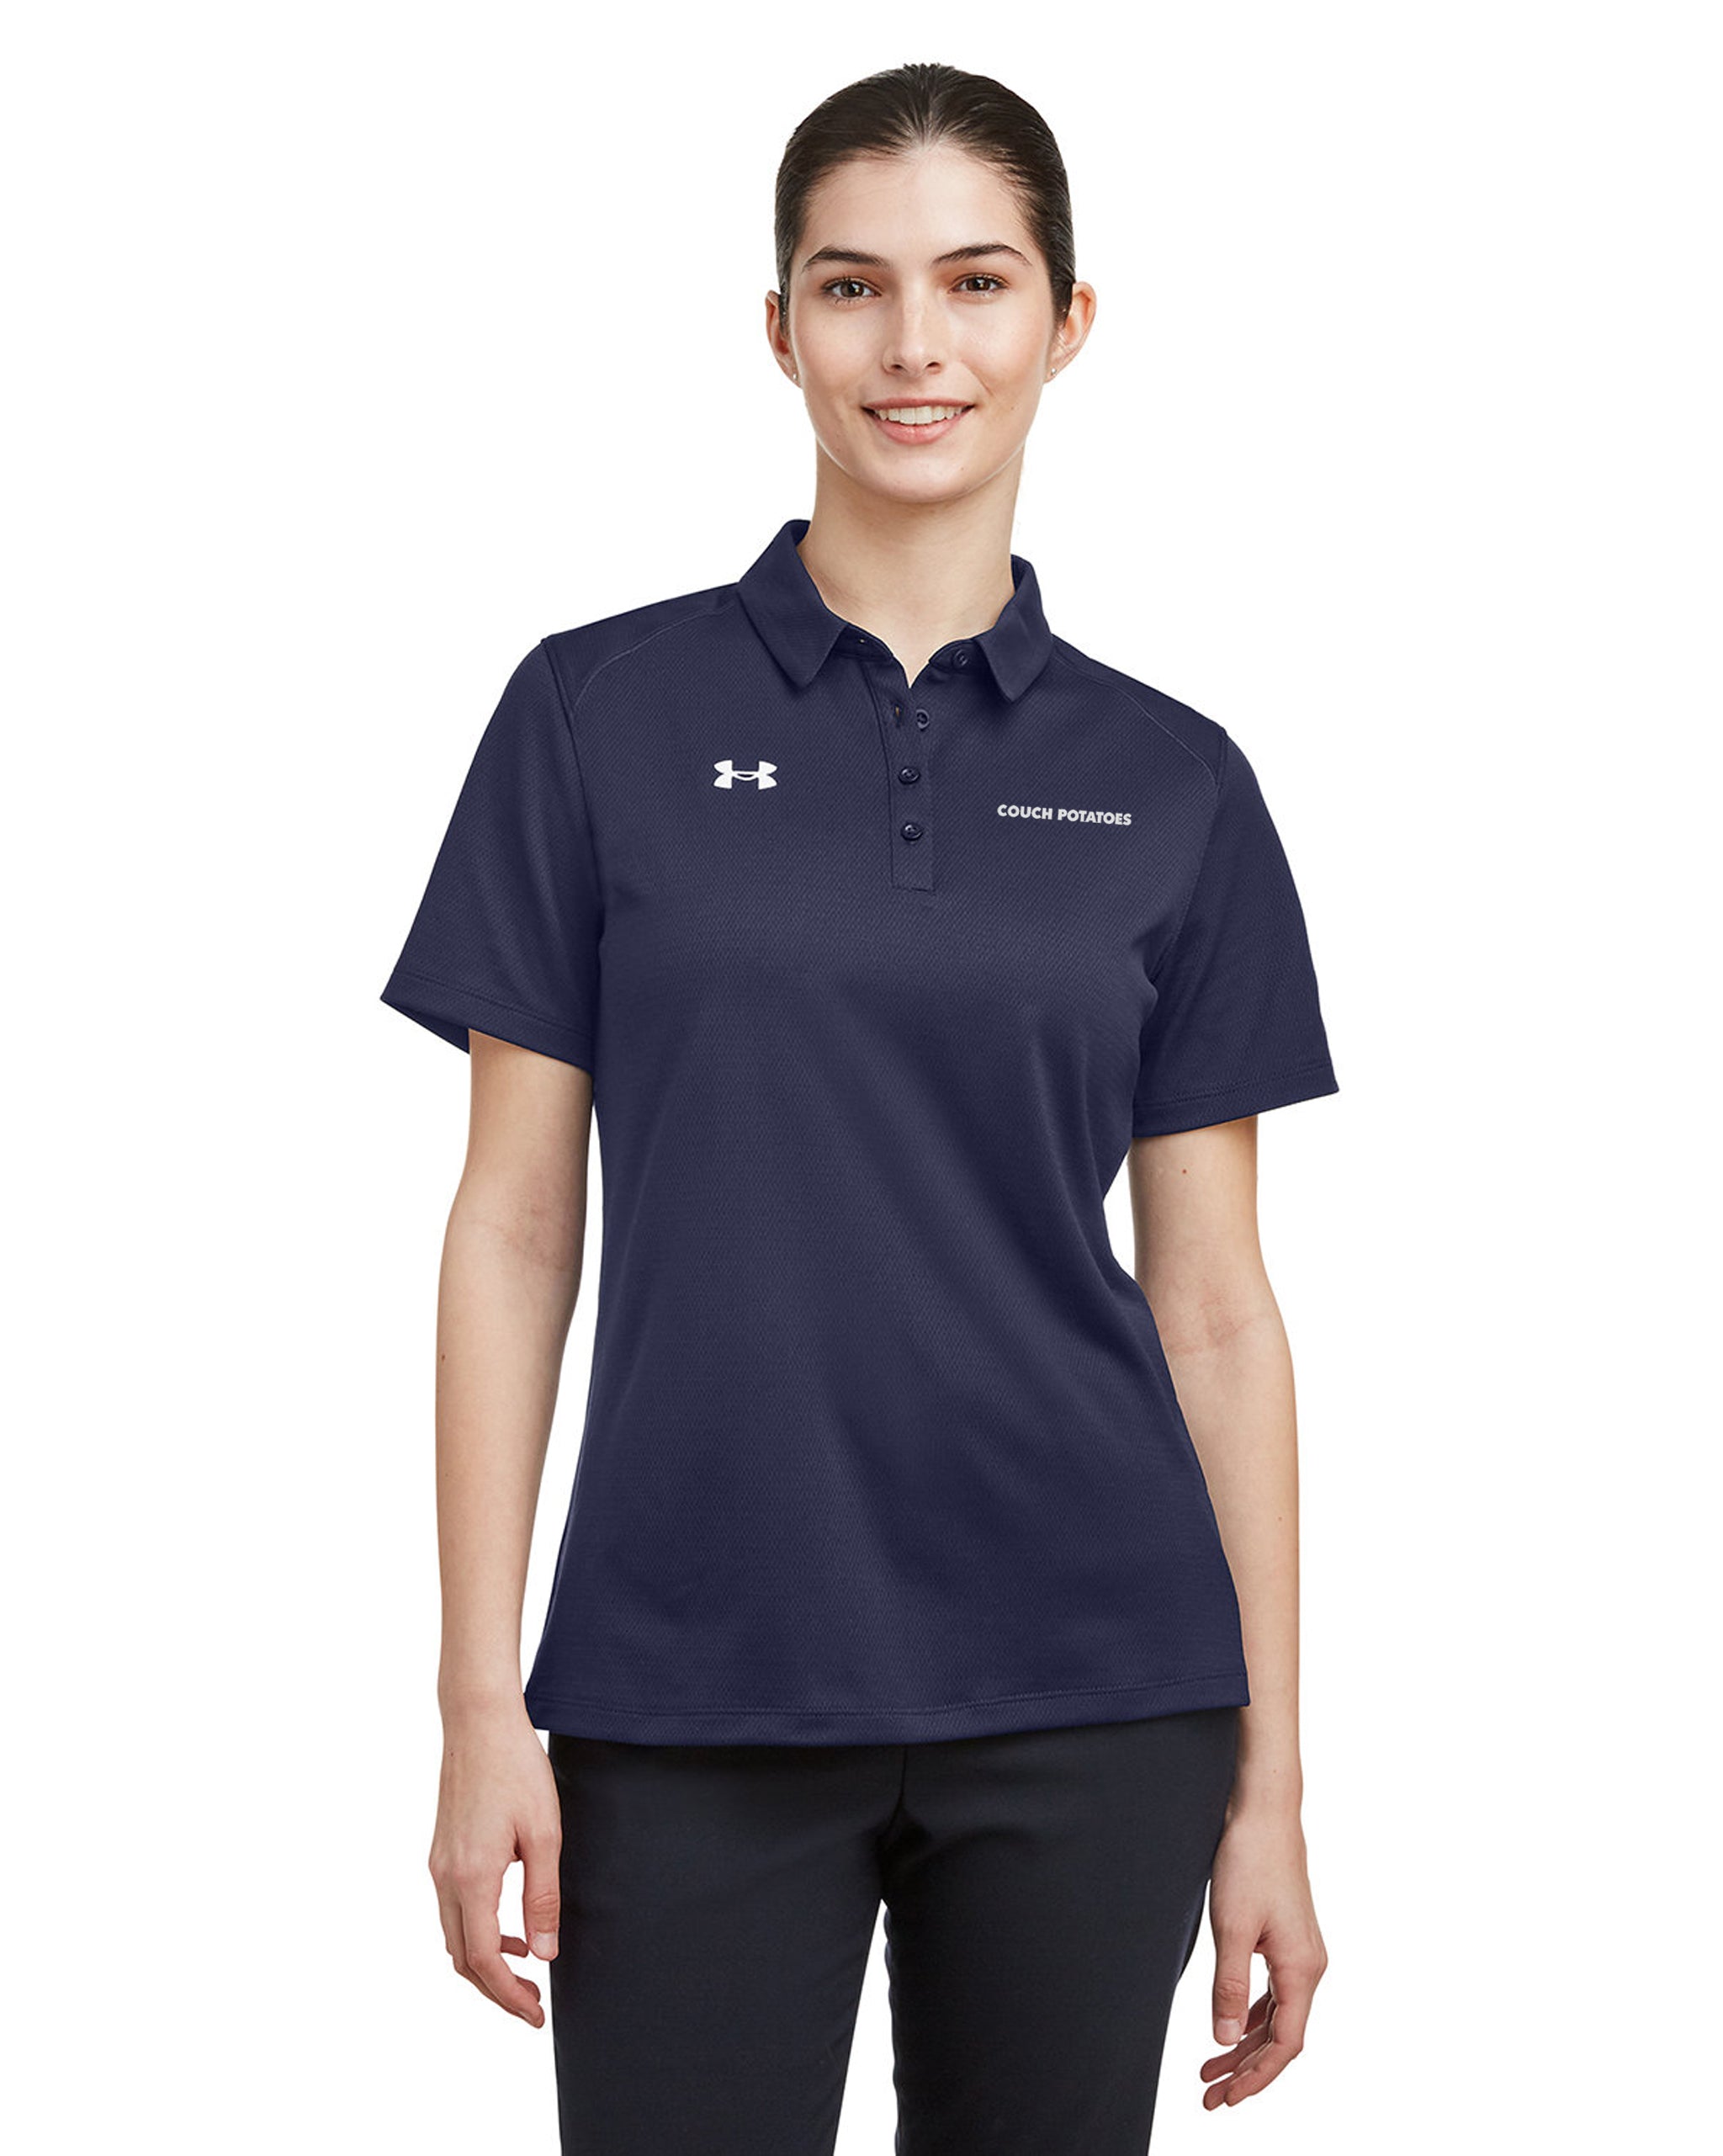 Couch Potatoes - Under Armour Ladies' Tech Polo - 1370431